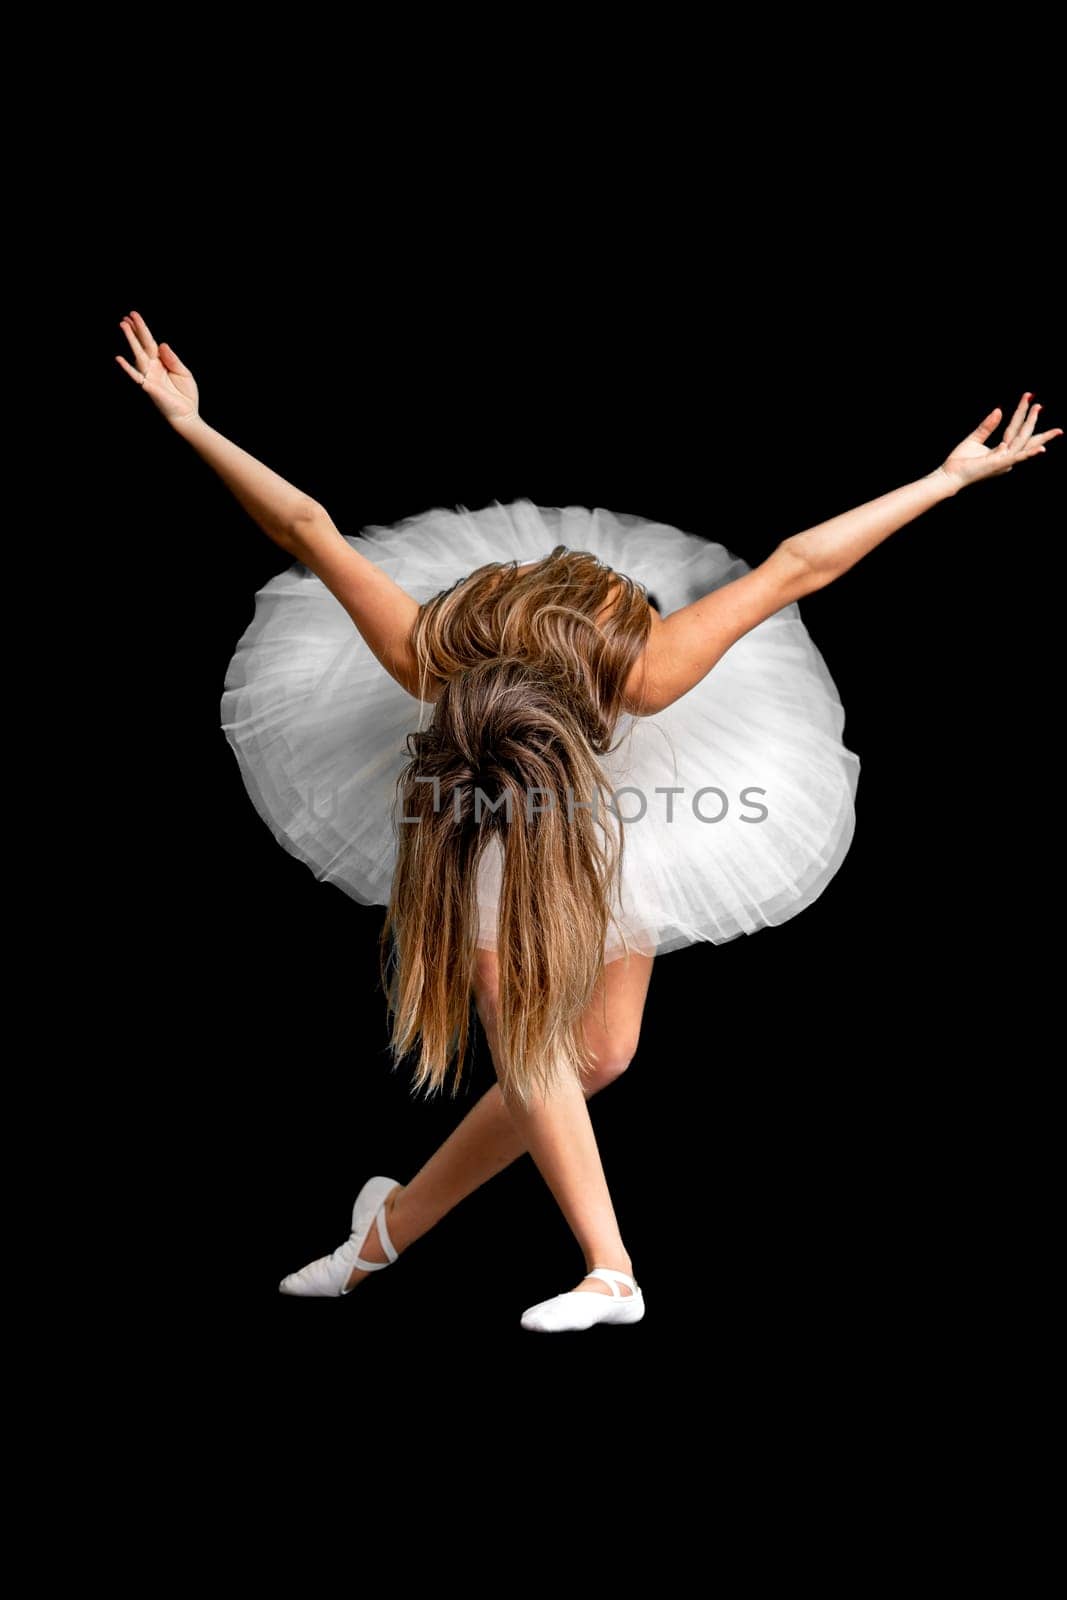 portrait of a ballerina in a pose, black background by Edophoto